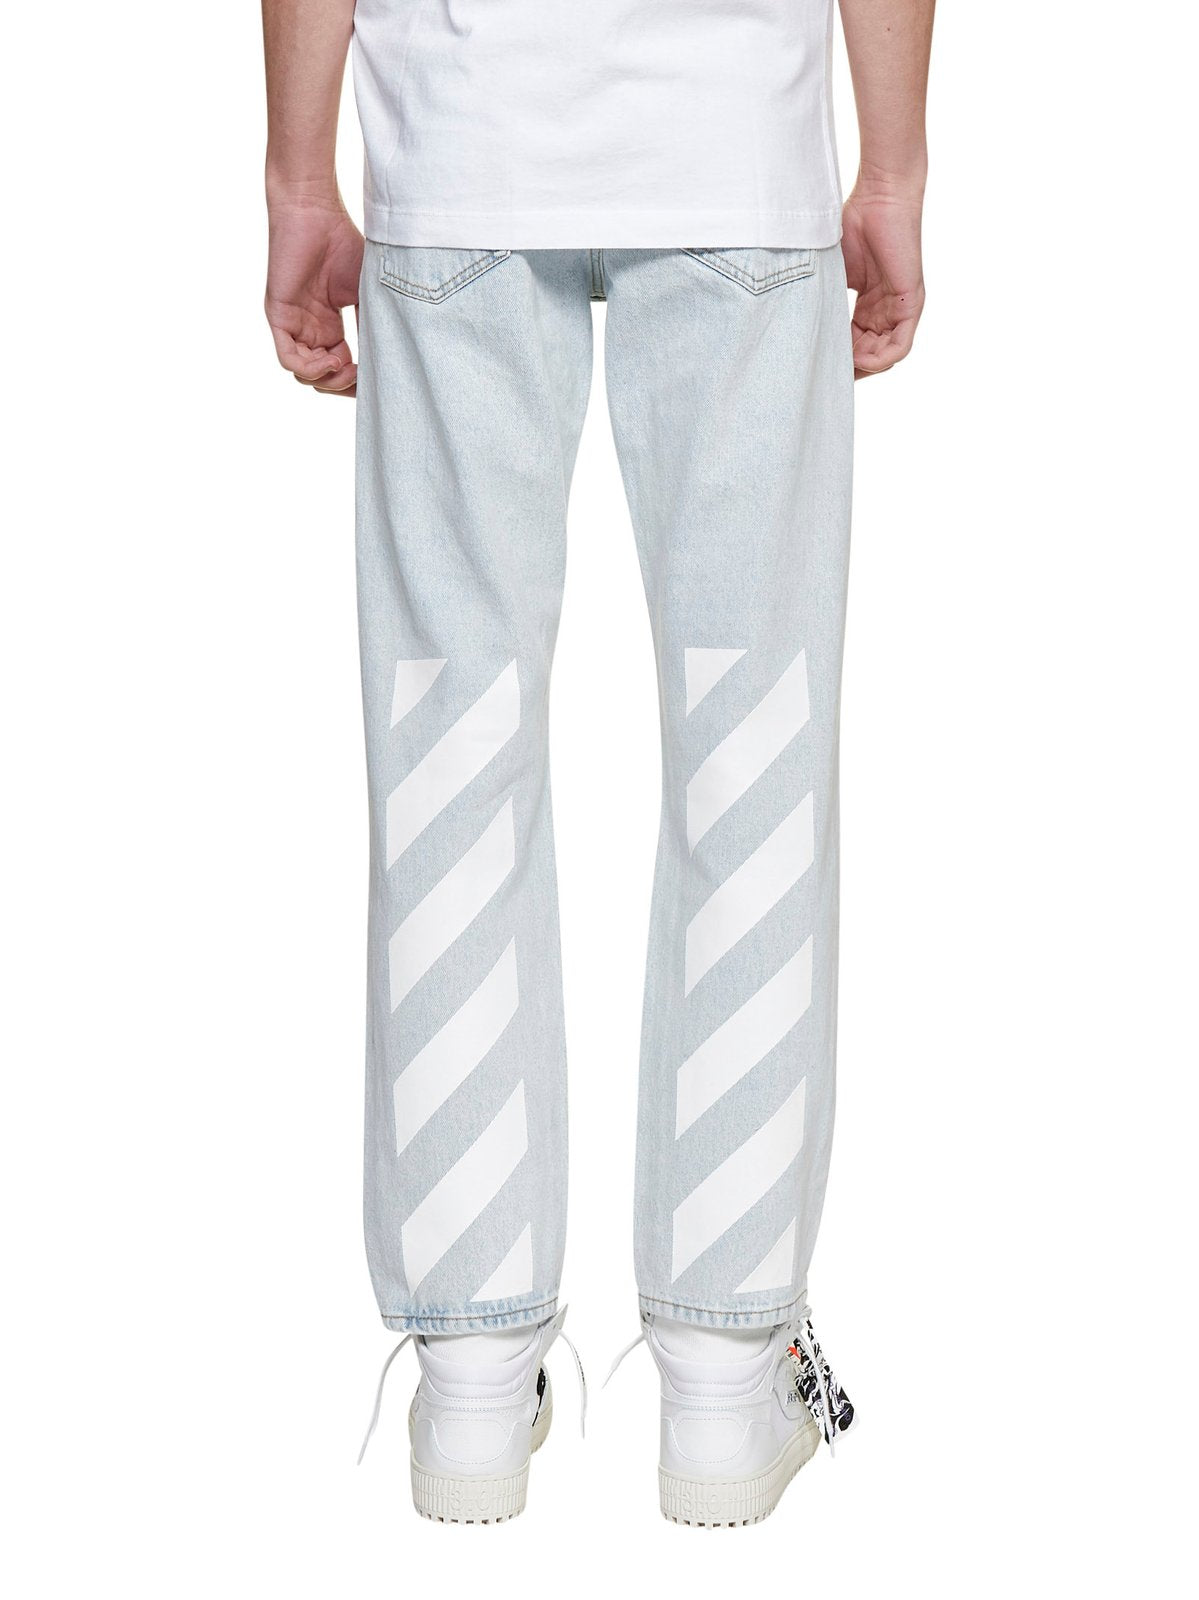 Off-White Diag Printed Slim Fit Jeans